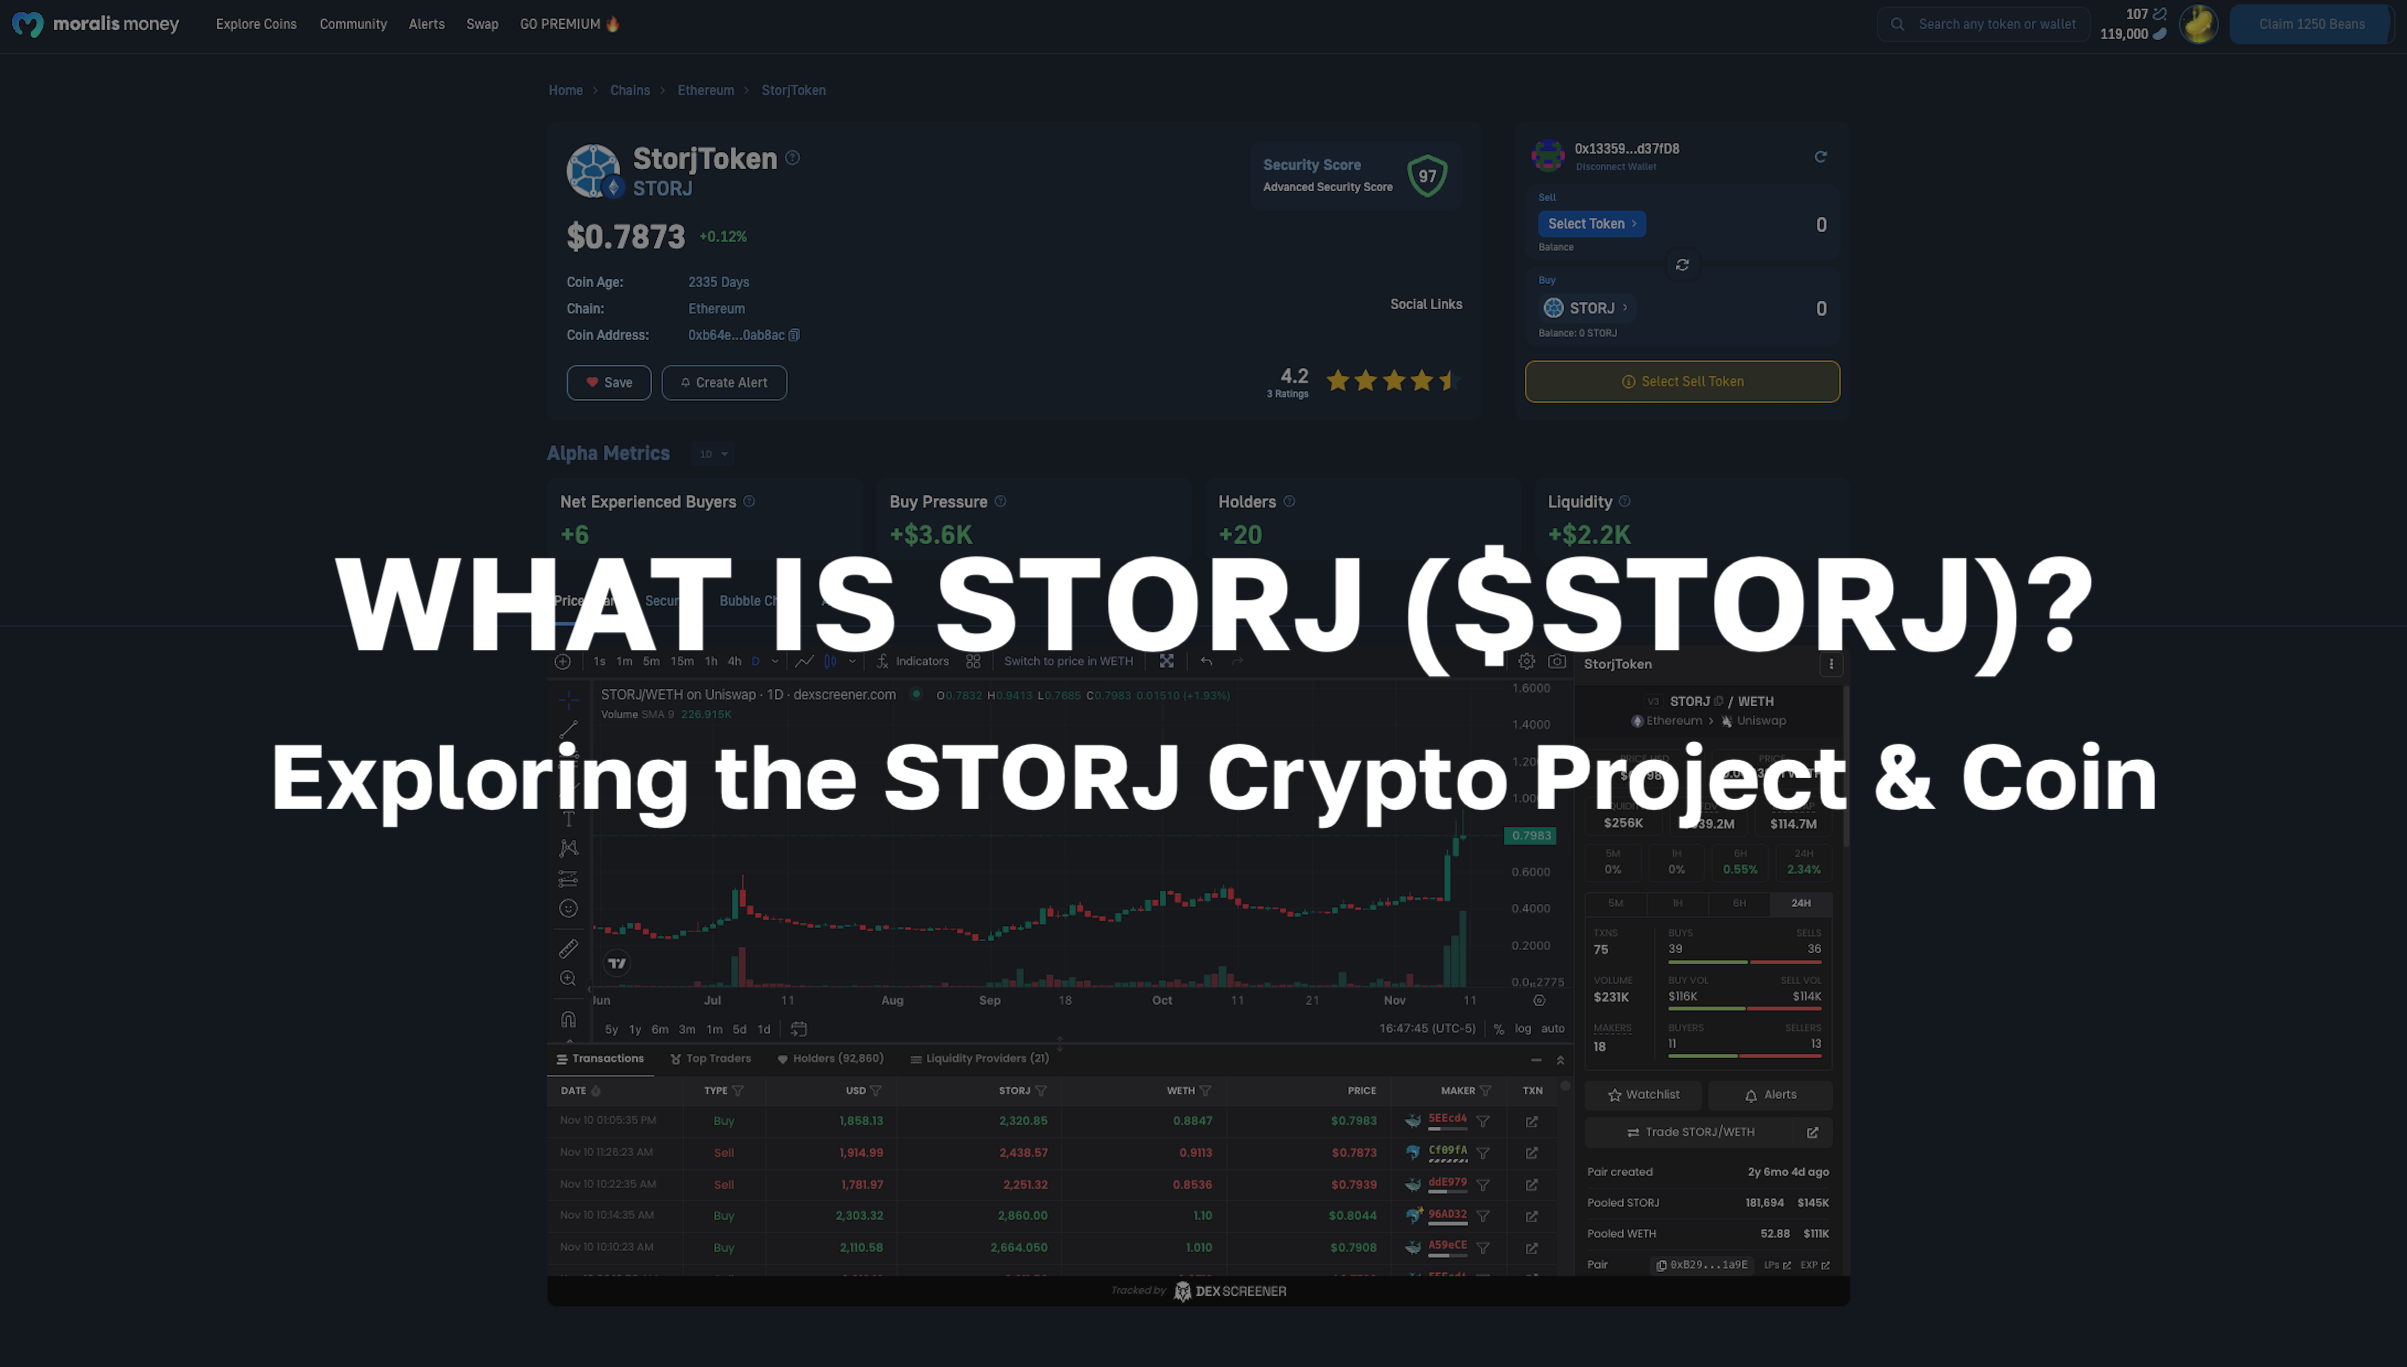 What is Storj? Exploring the STORJ Crypto Project and Coin